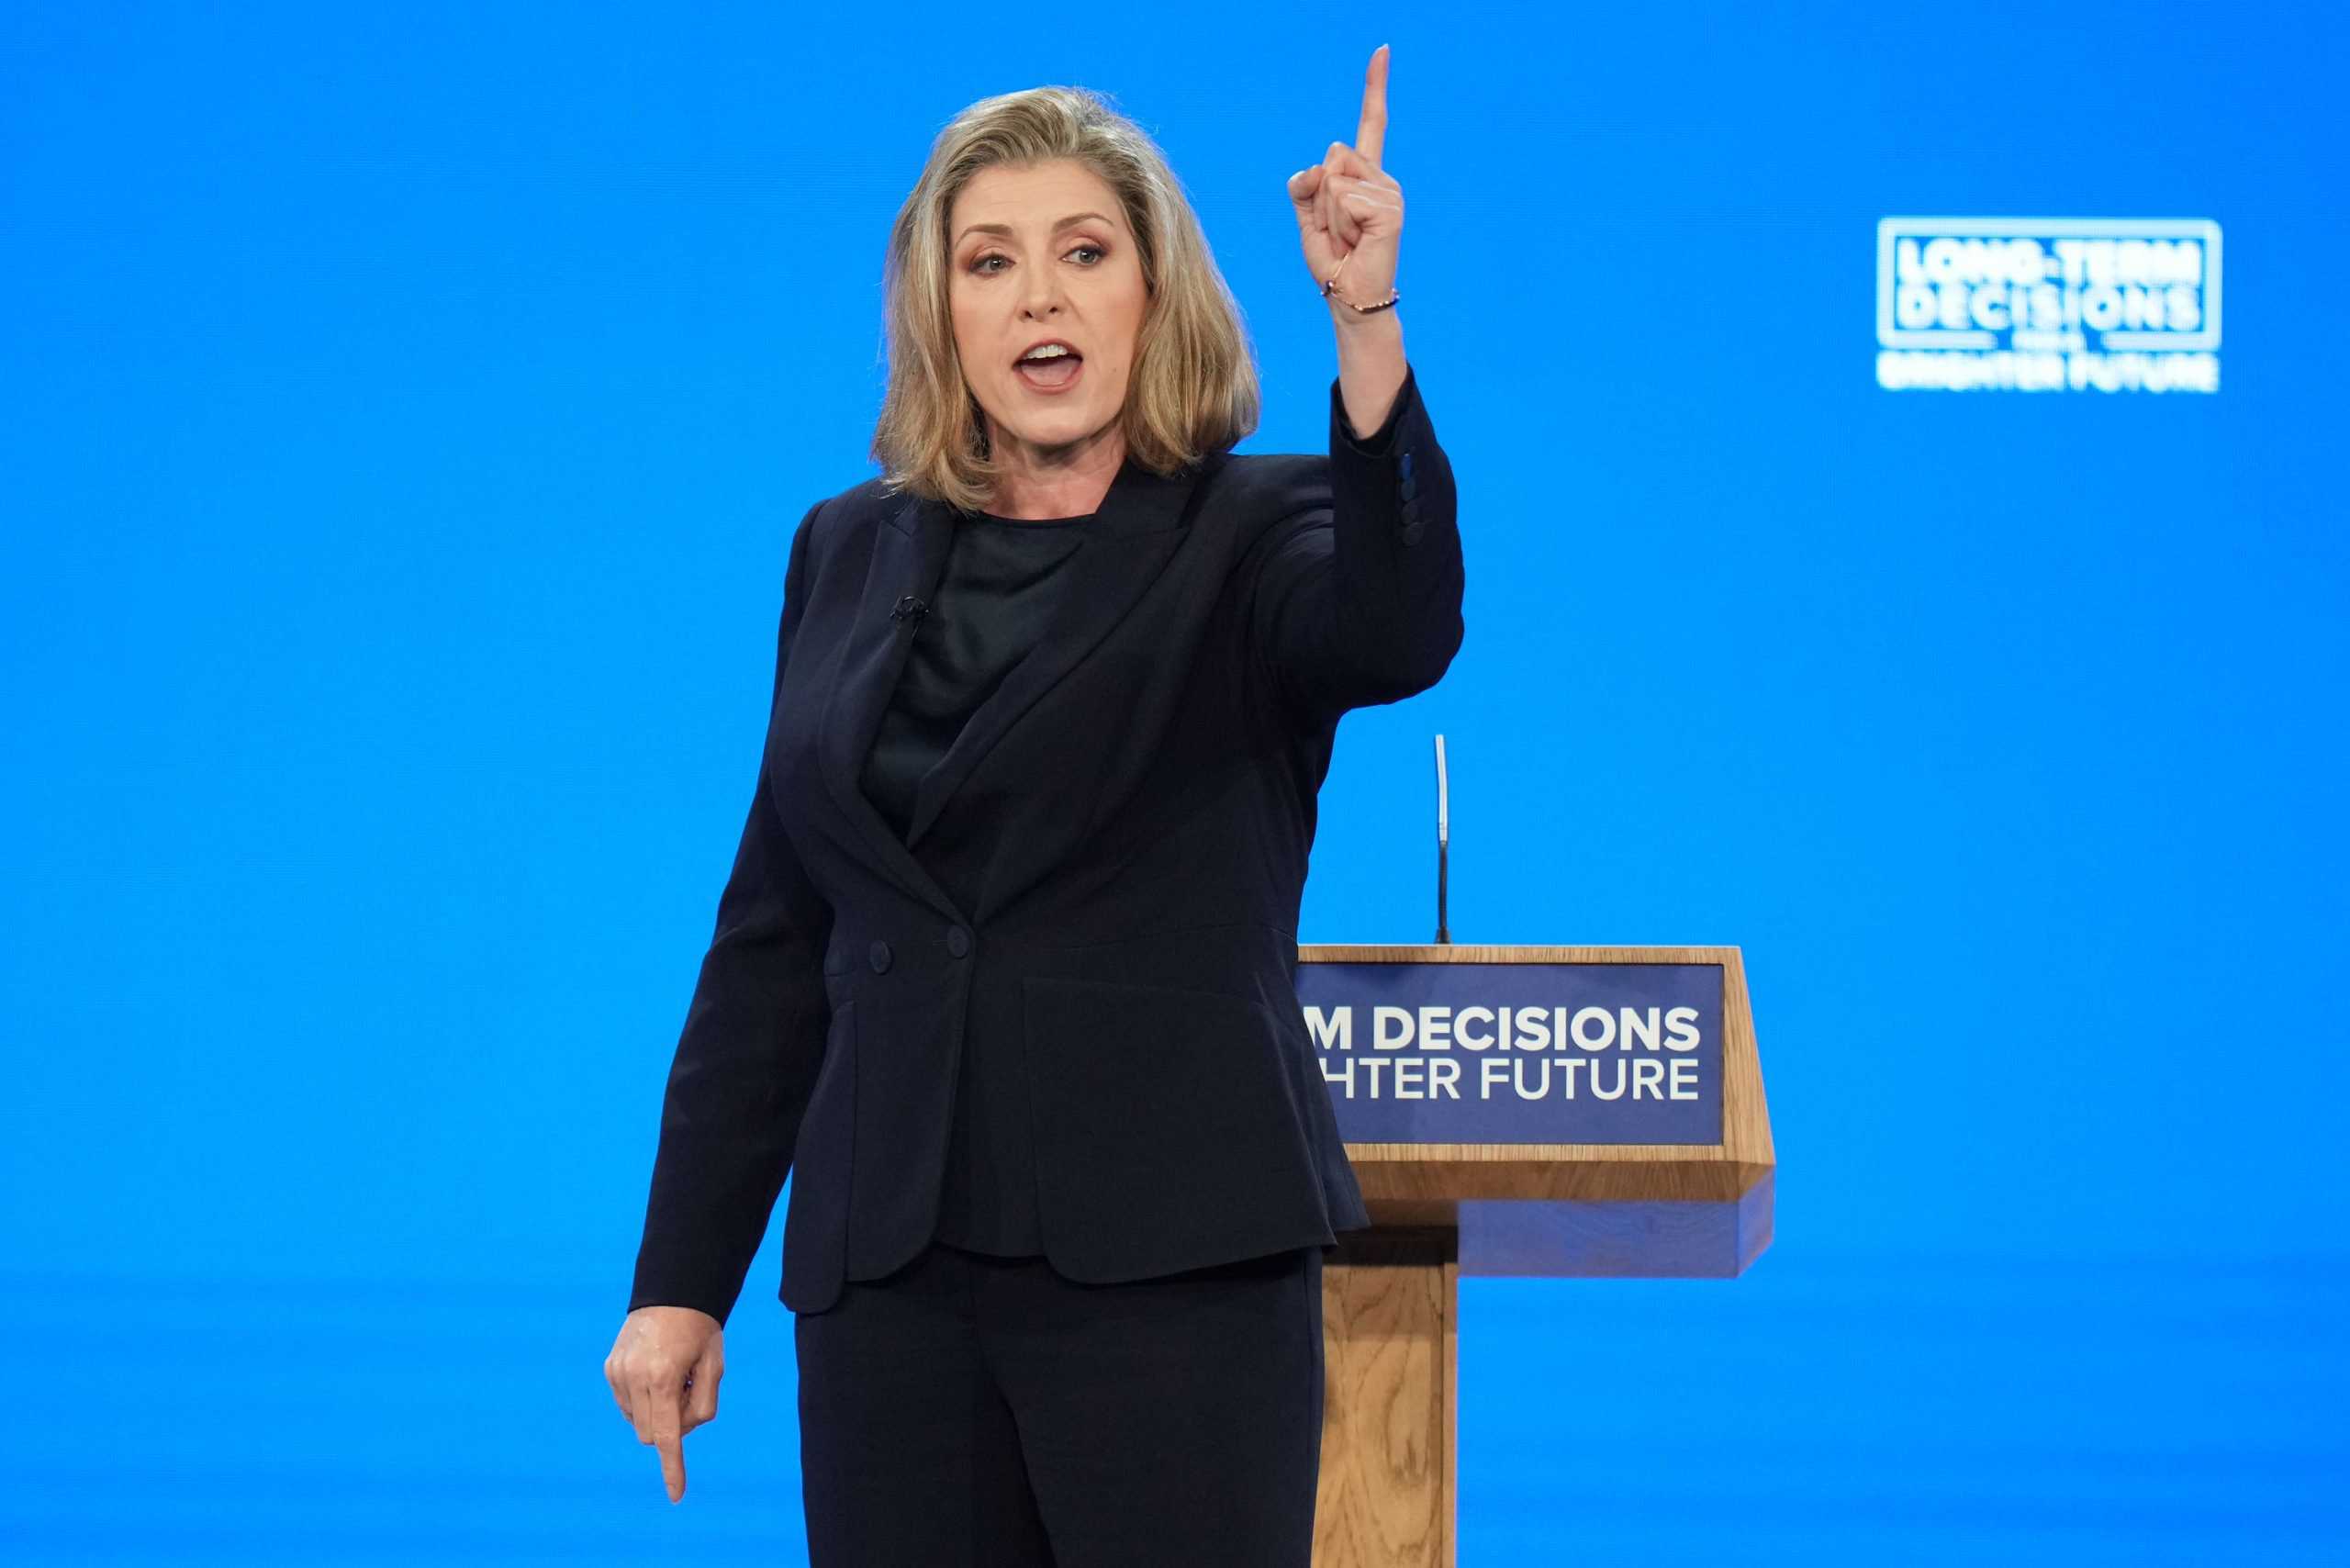 I’m too left wing for Sir Keir Starmer’s Labour – Mordaunt